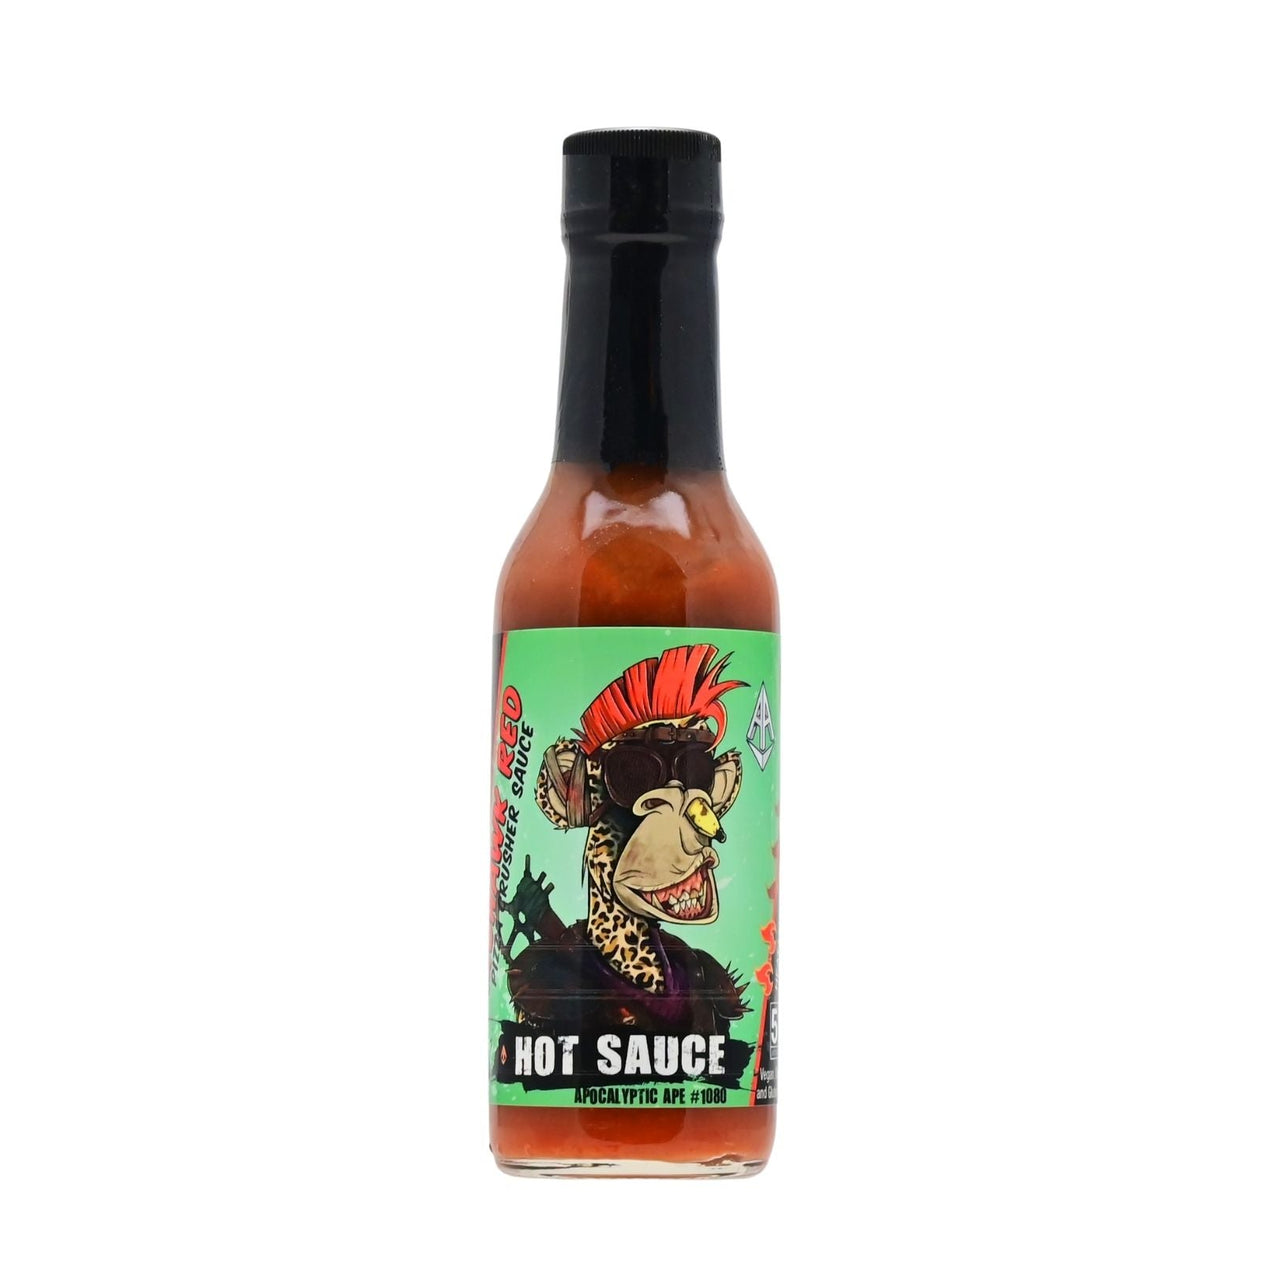 Apocalyptic Ape #1080 Mohawk Red Hot Sauce